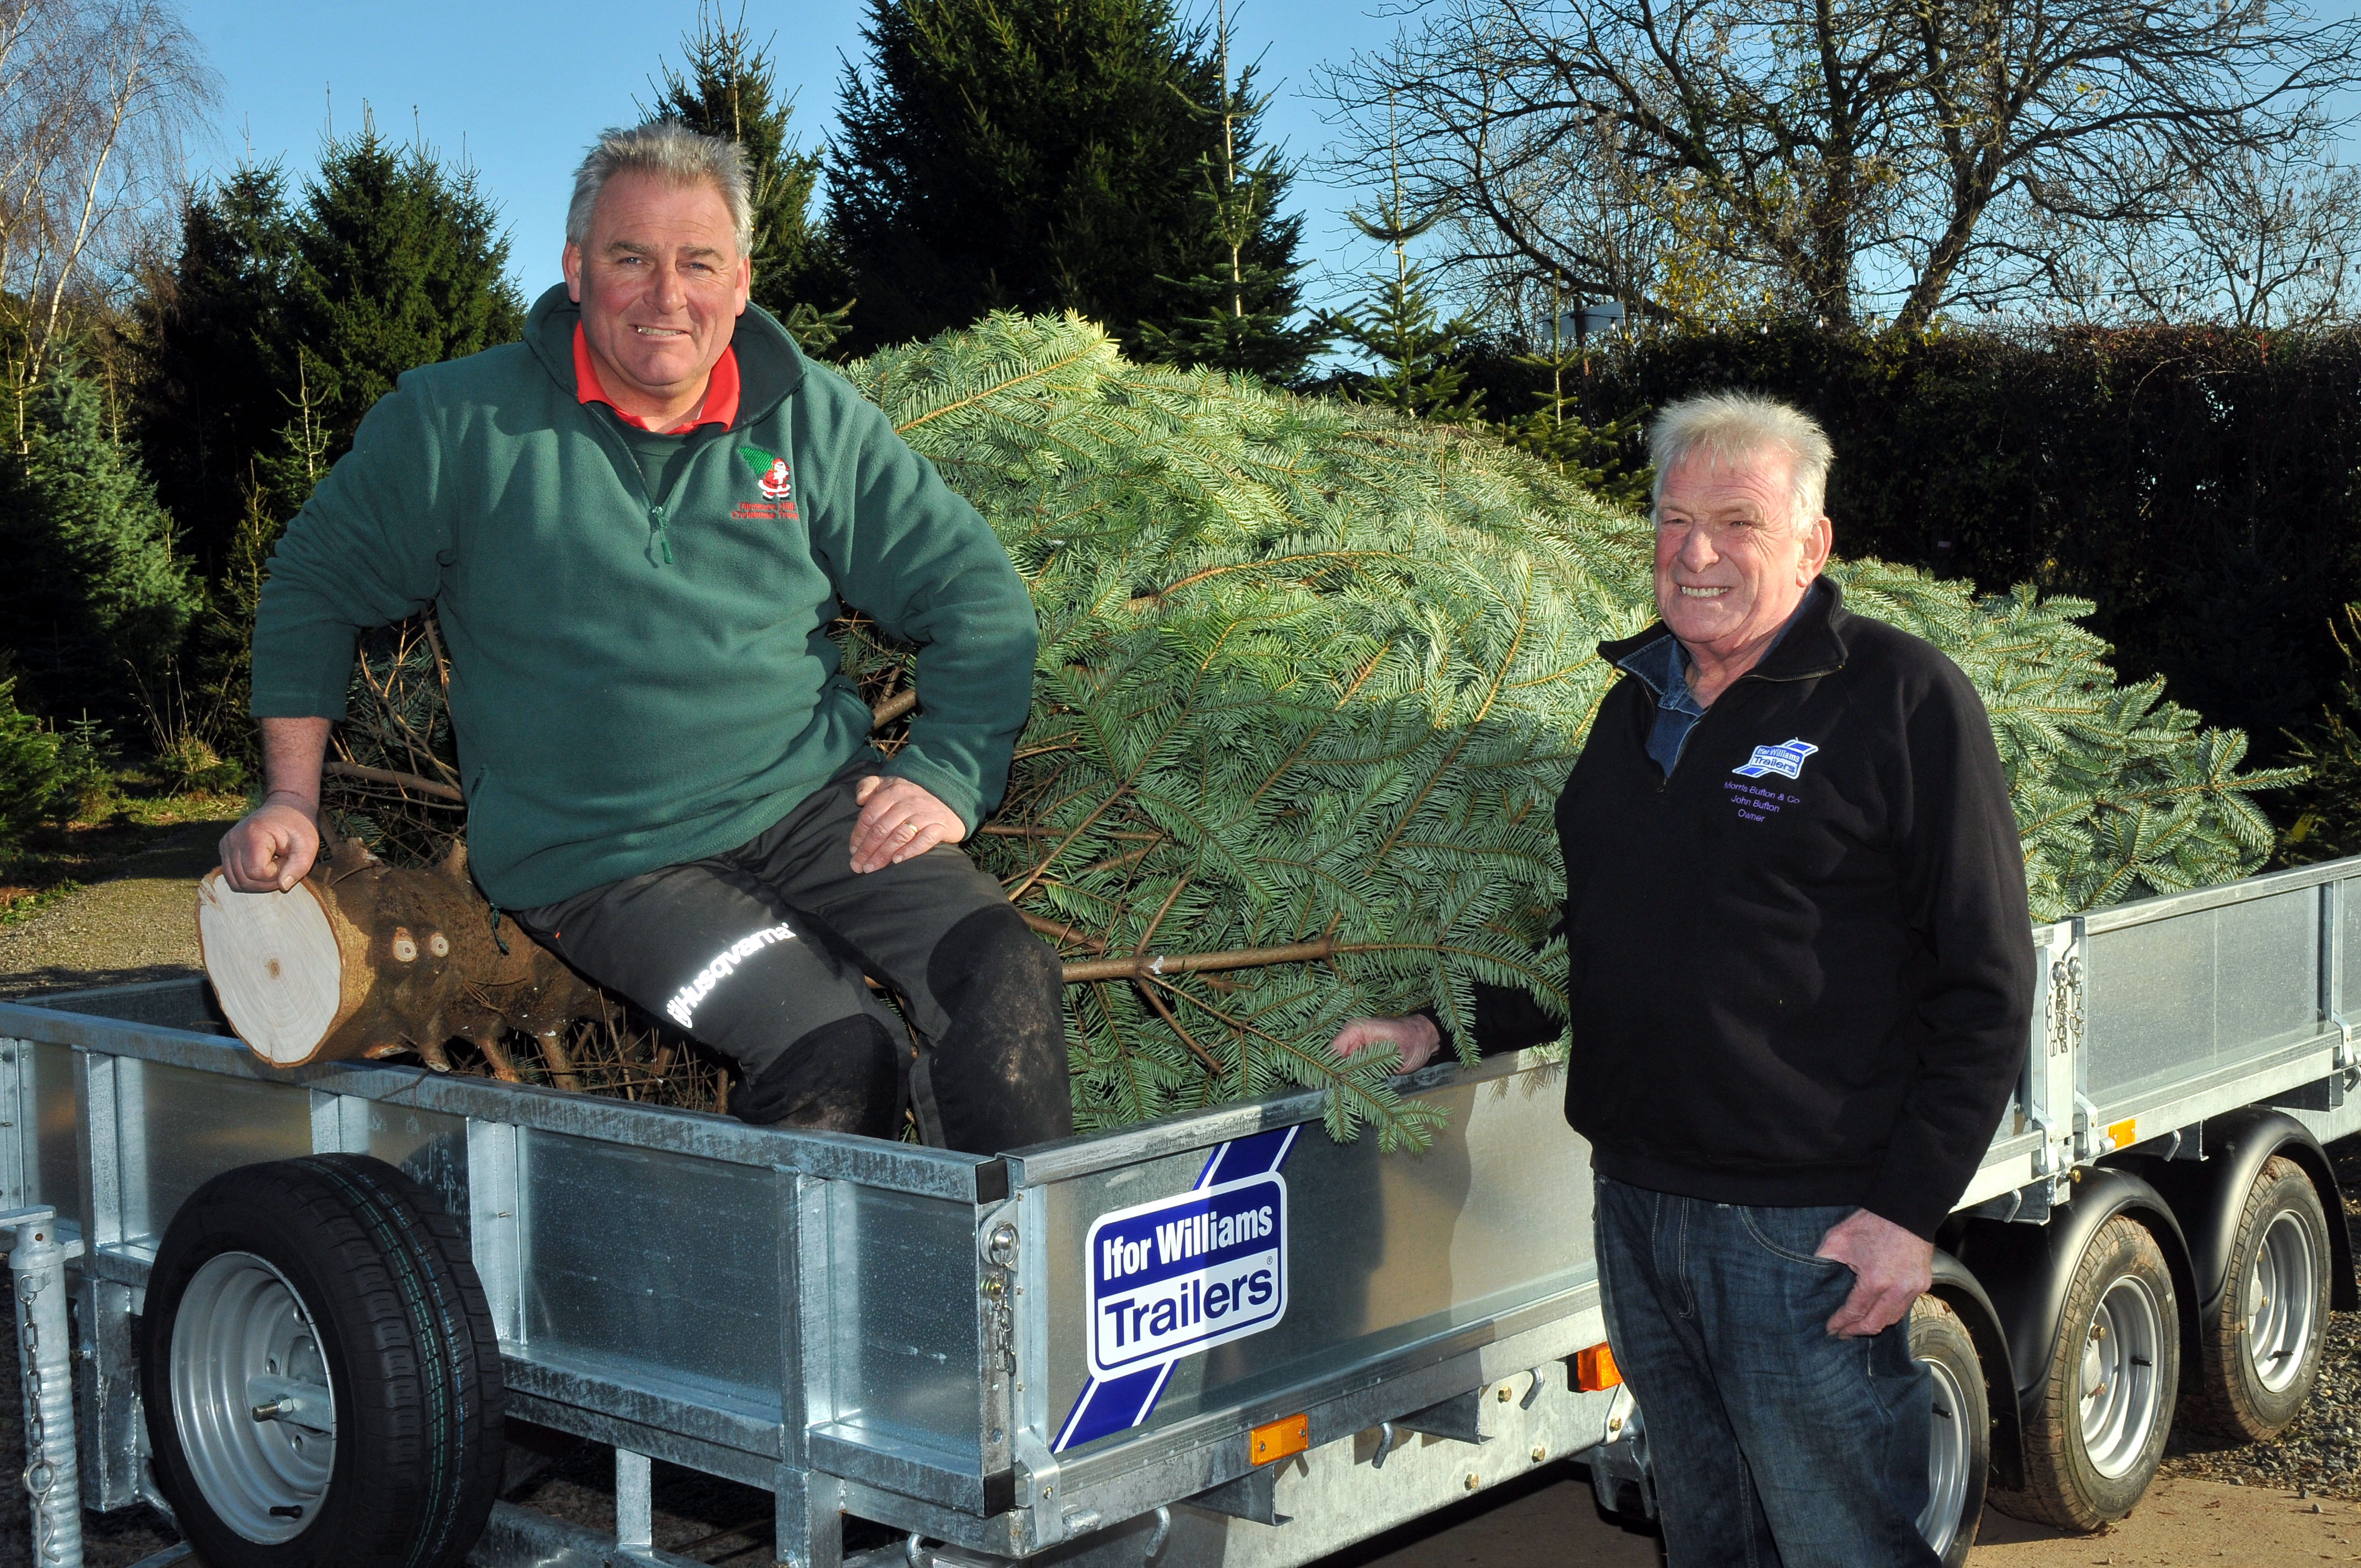 Trailer firm delivers Christmas tree to Downing Street